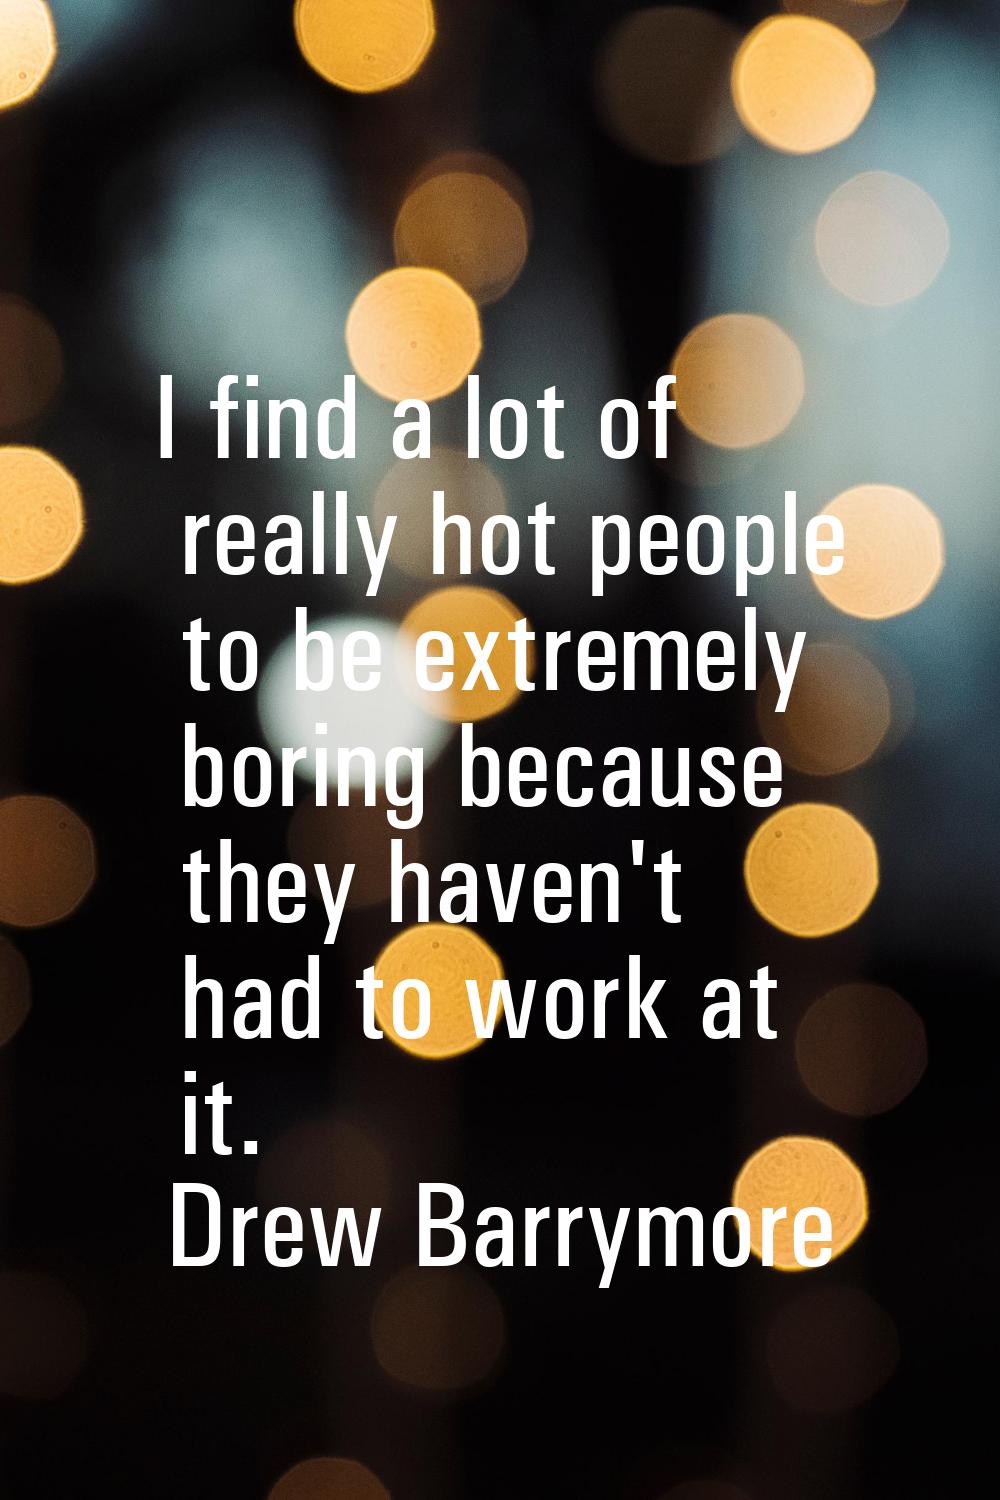 I find a lot of really hot people to be extremely boring because they haven't had to work at it.